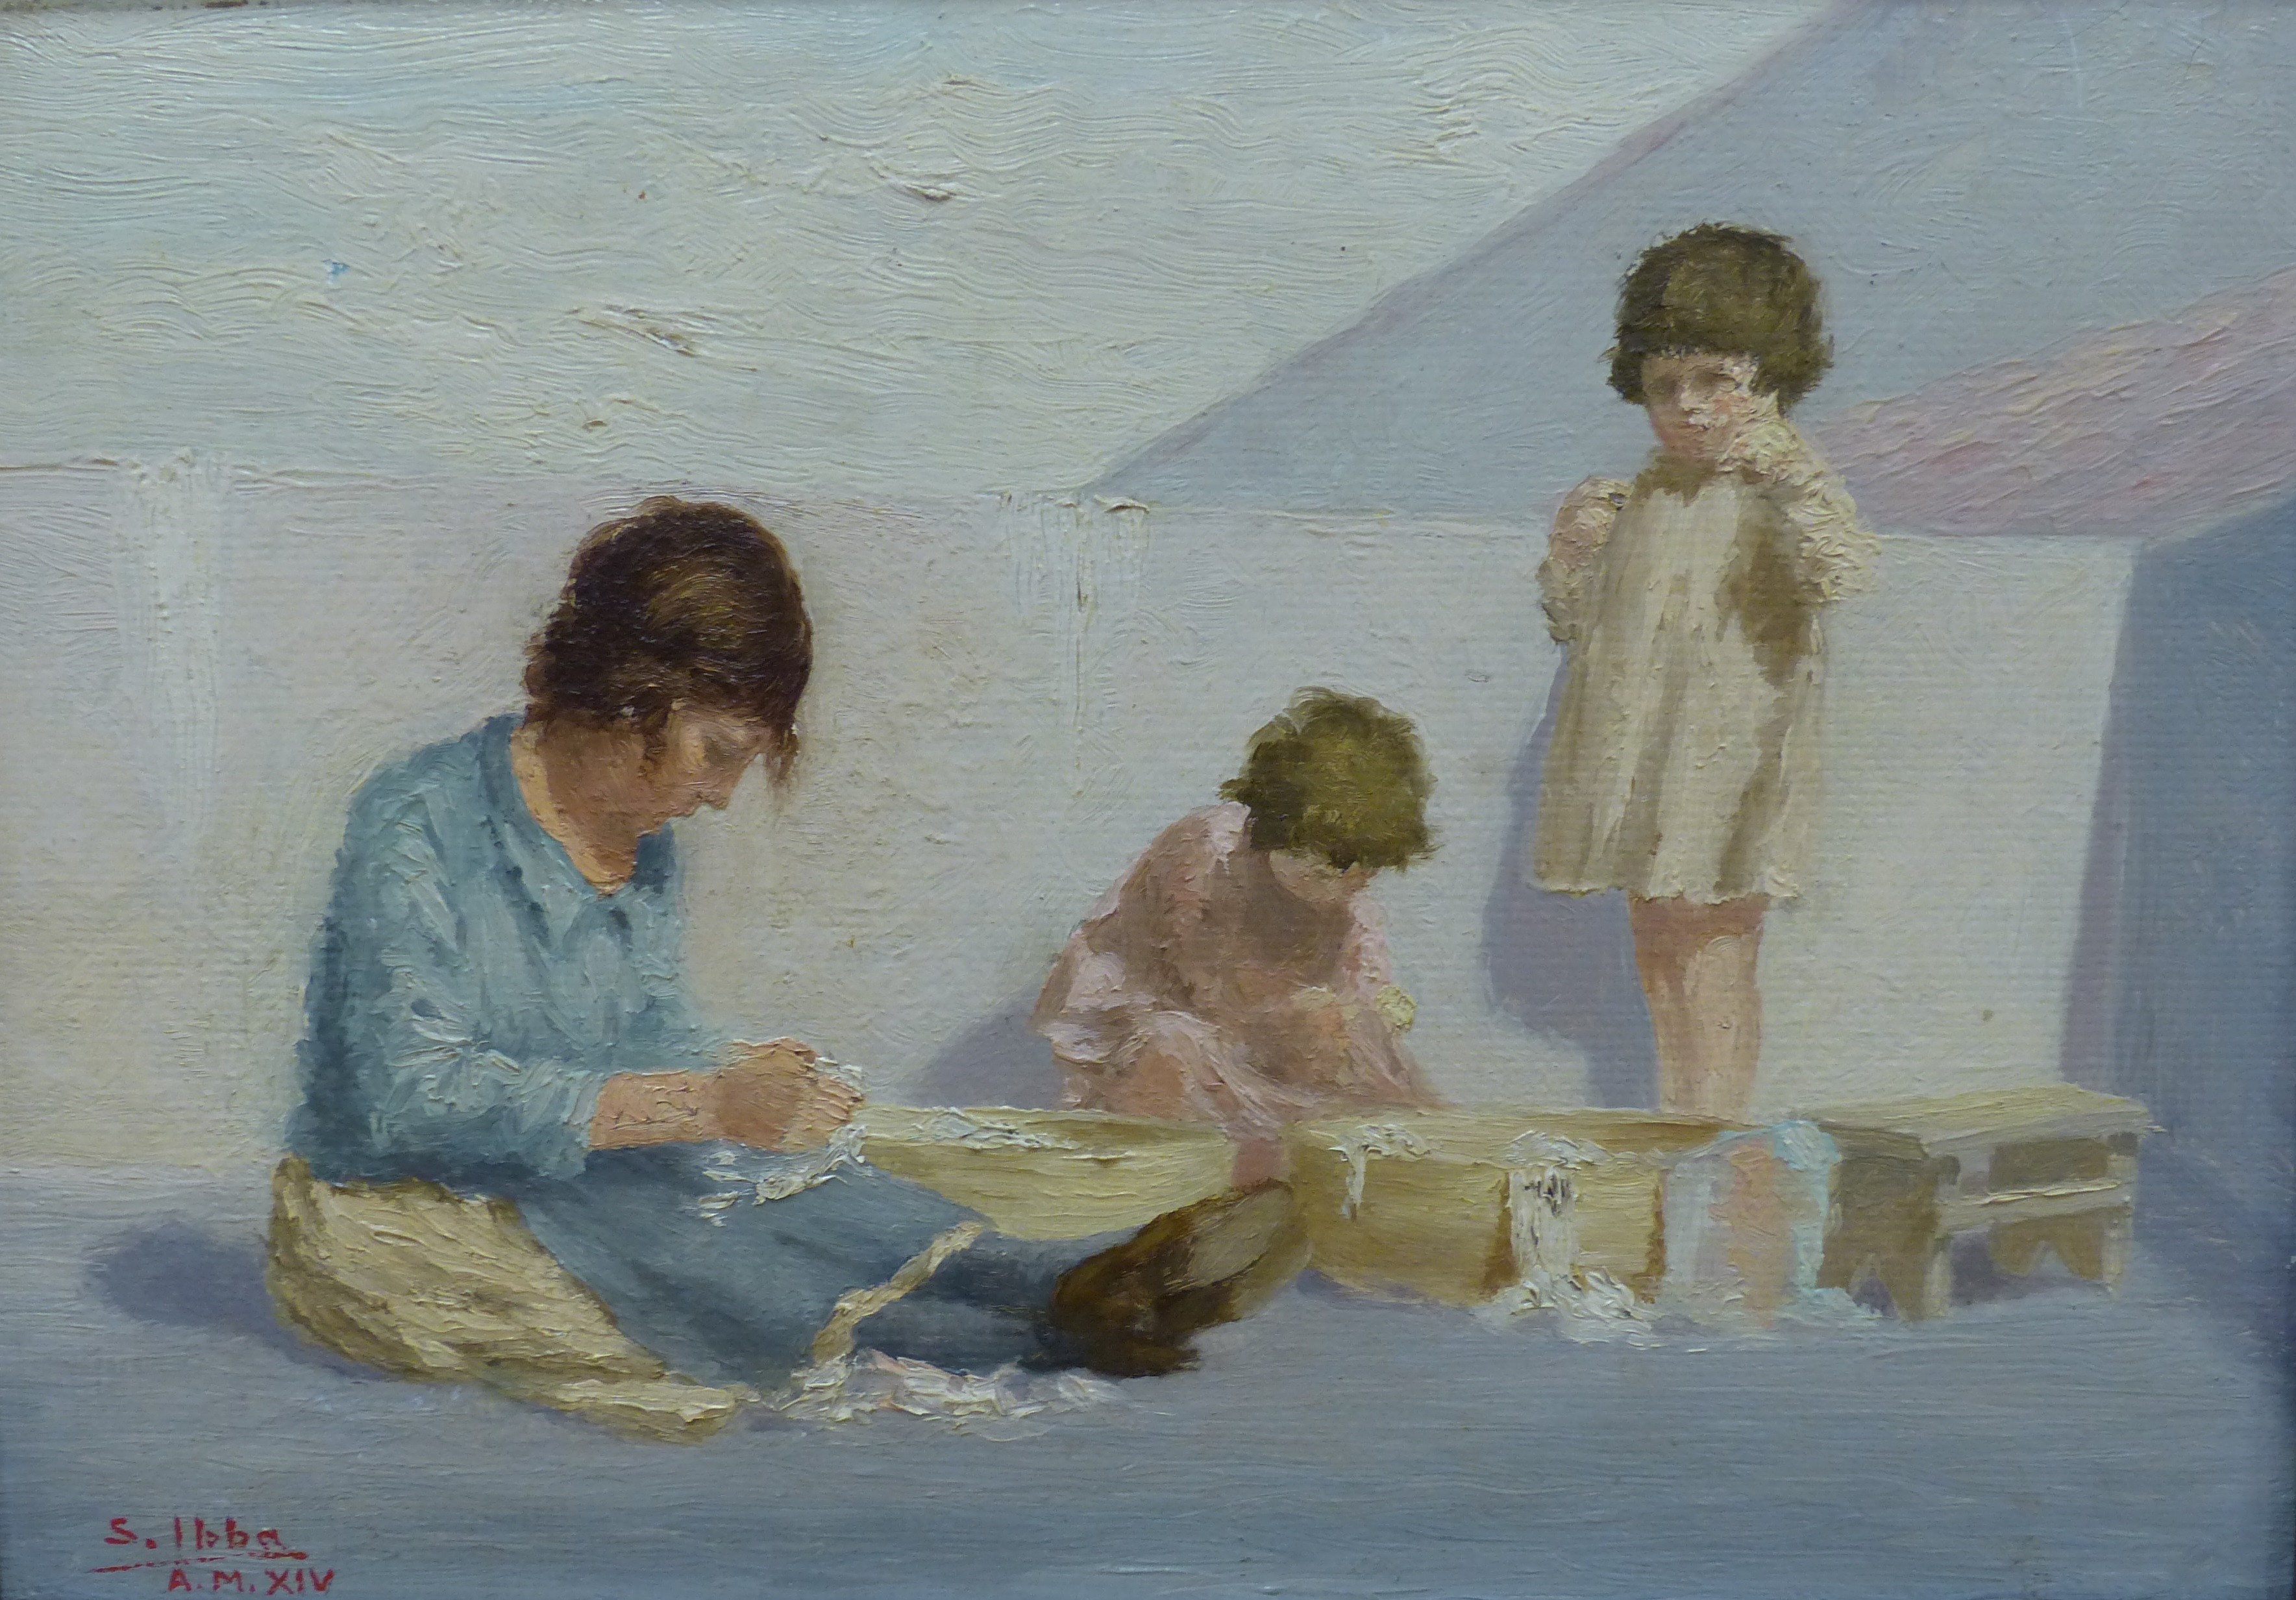 S. Ibba, oil on board, Street children washing clothes, 34 x 24cm